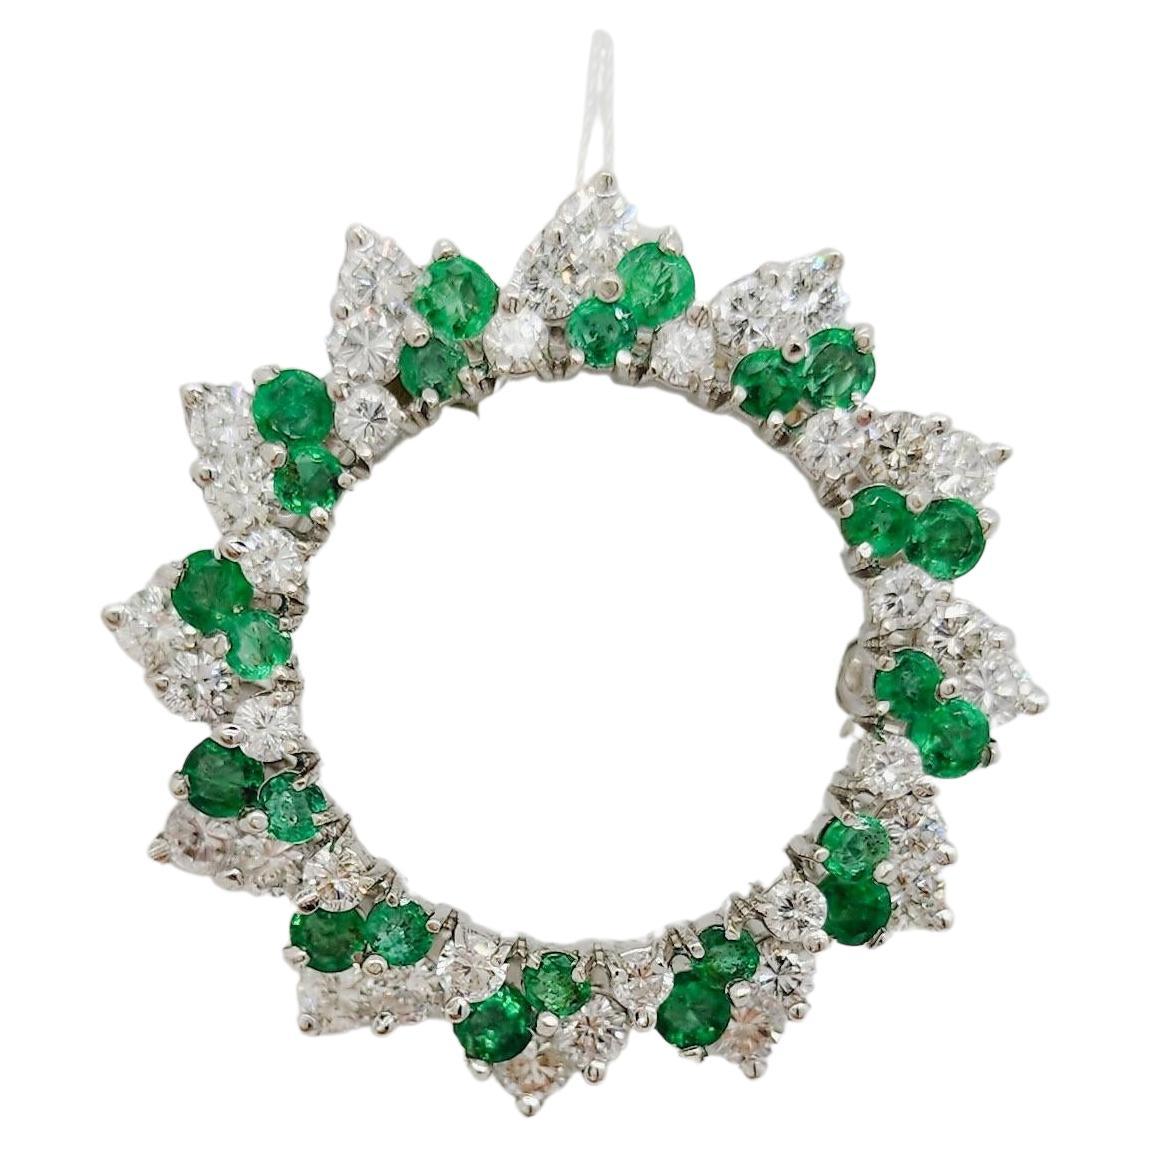 Emerald and White Diamond Wreath Brooch in 14k White Gold